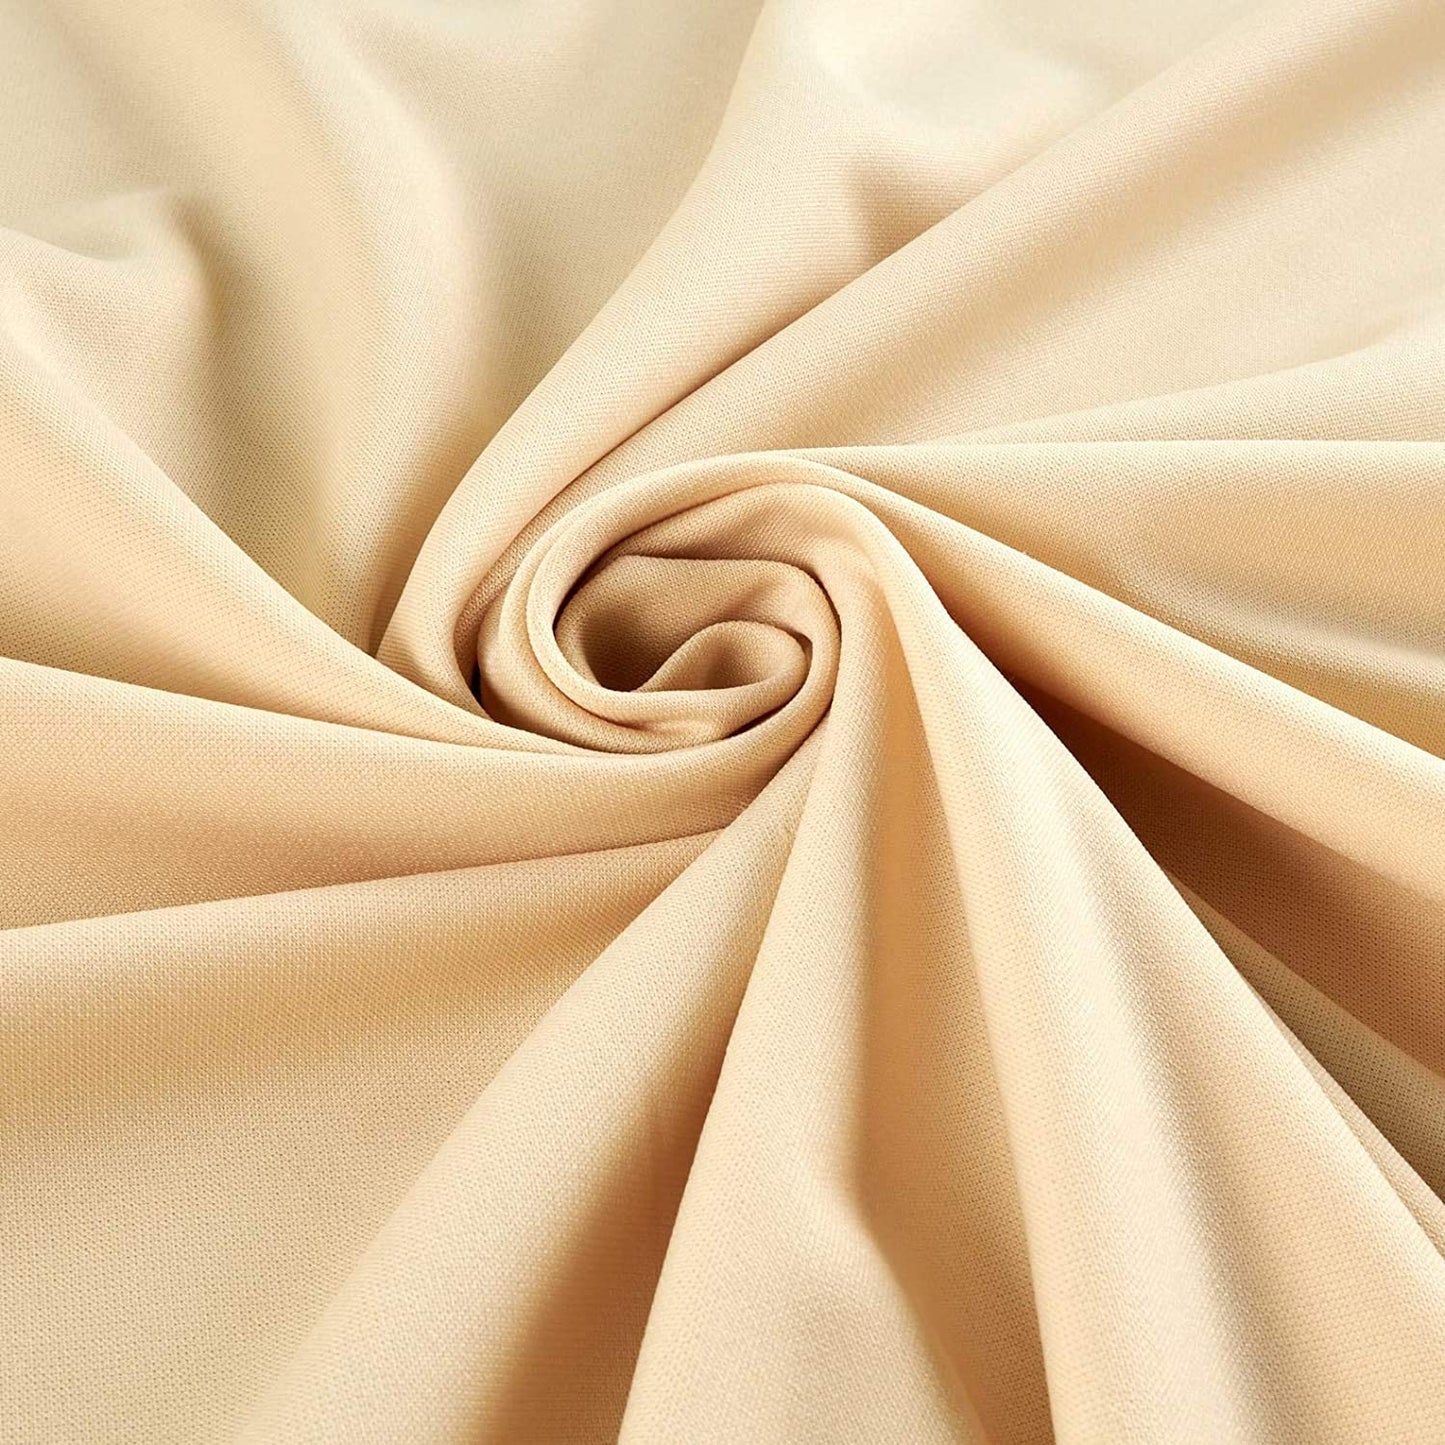 100% Polyester Wrinkle Free Stretch Double Knit Scuba Fabric (Champagne, 1 Yard)